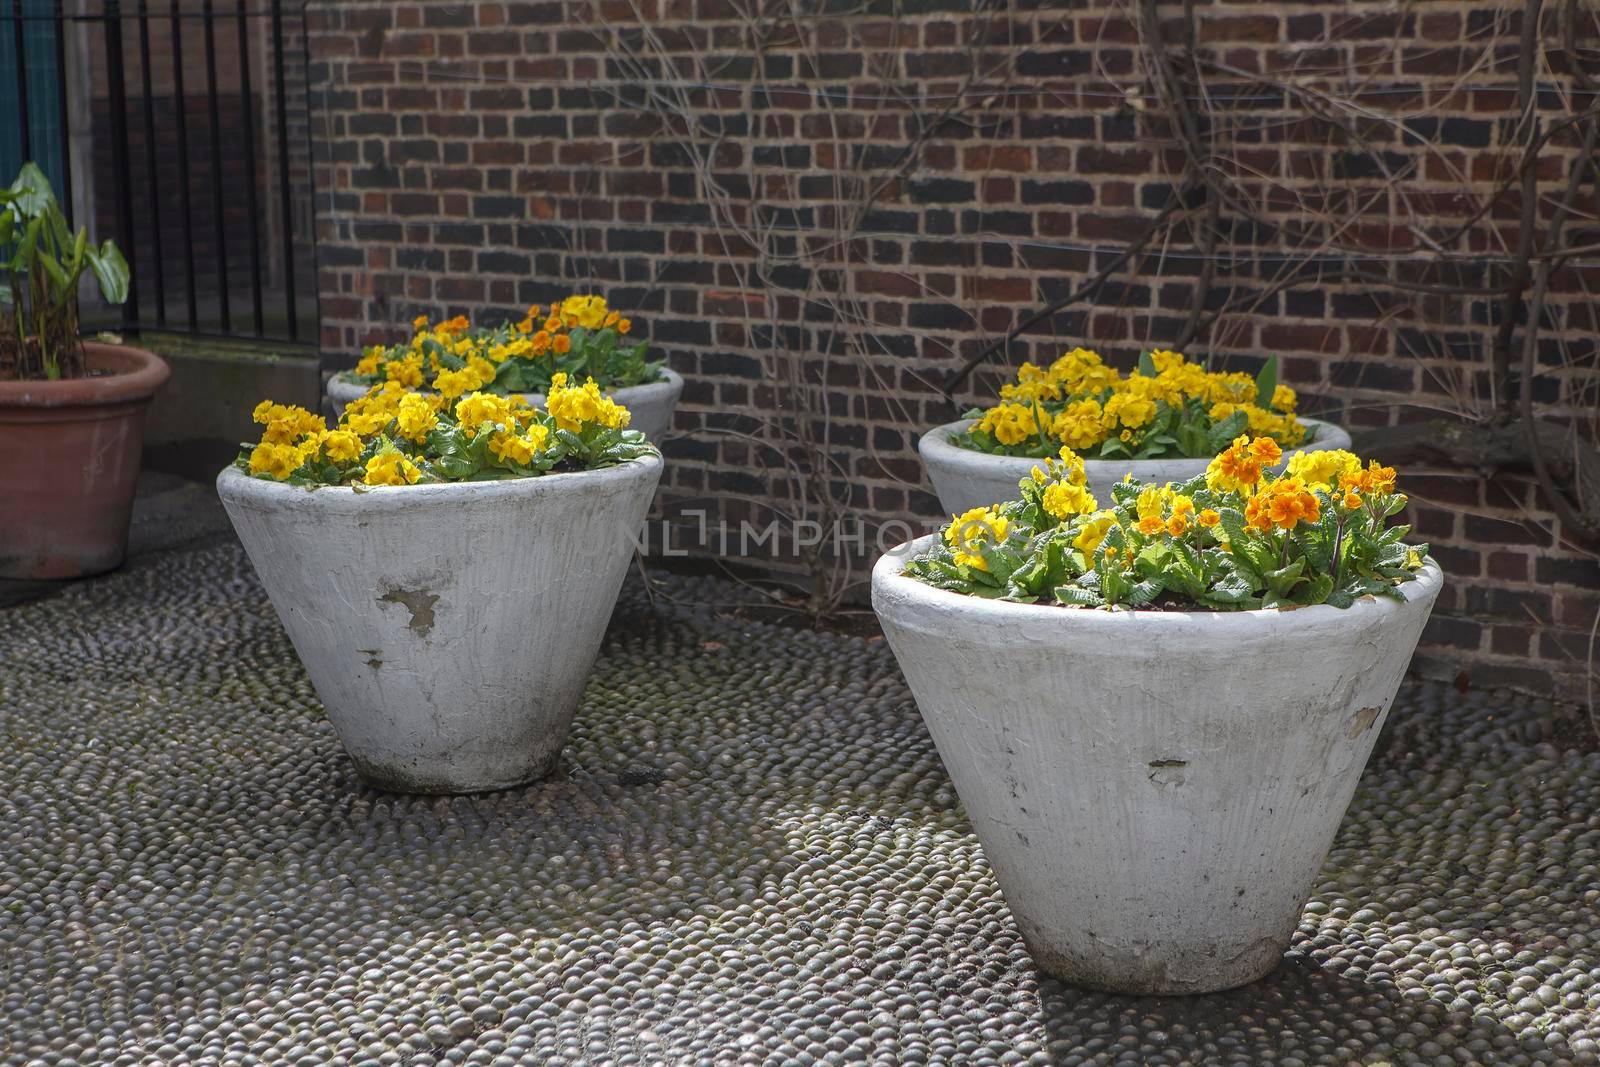 Yellow primroses in large ceramic pots near a stone wall as a park decoration